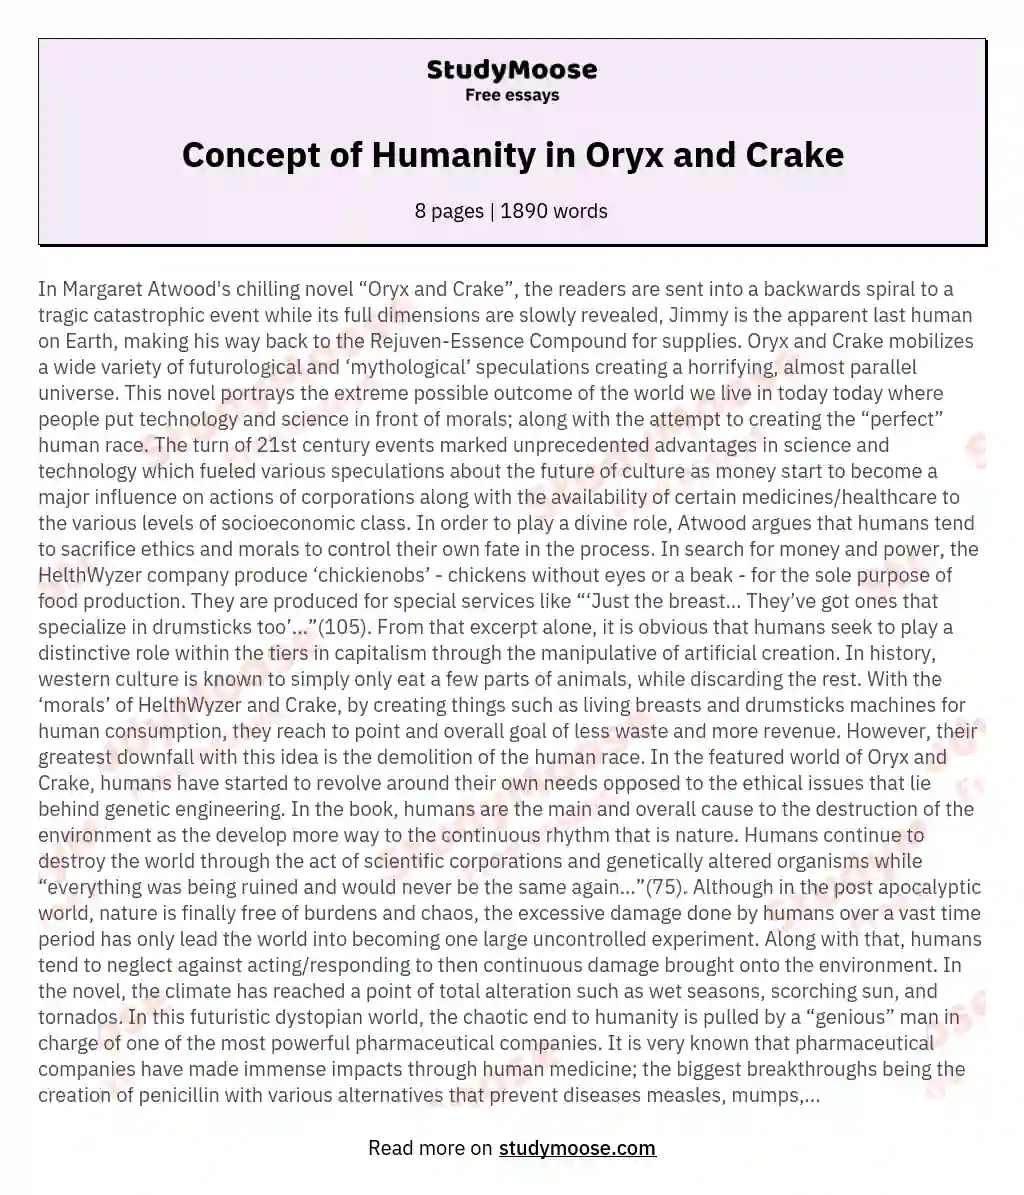 Concept of Humanity in Oryx and Crake essay